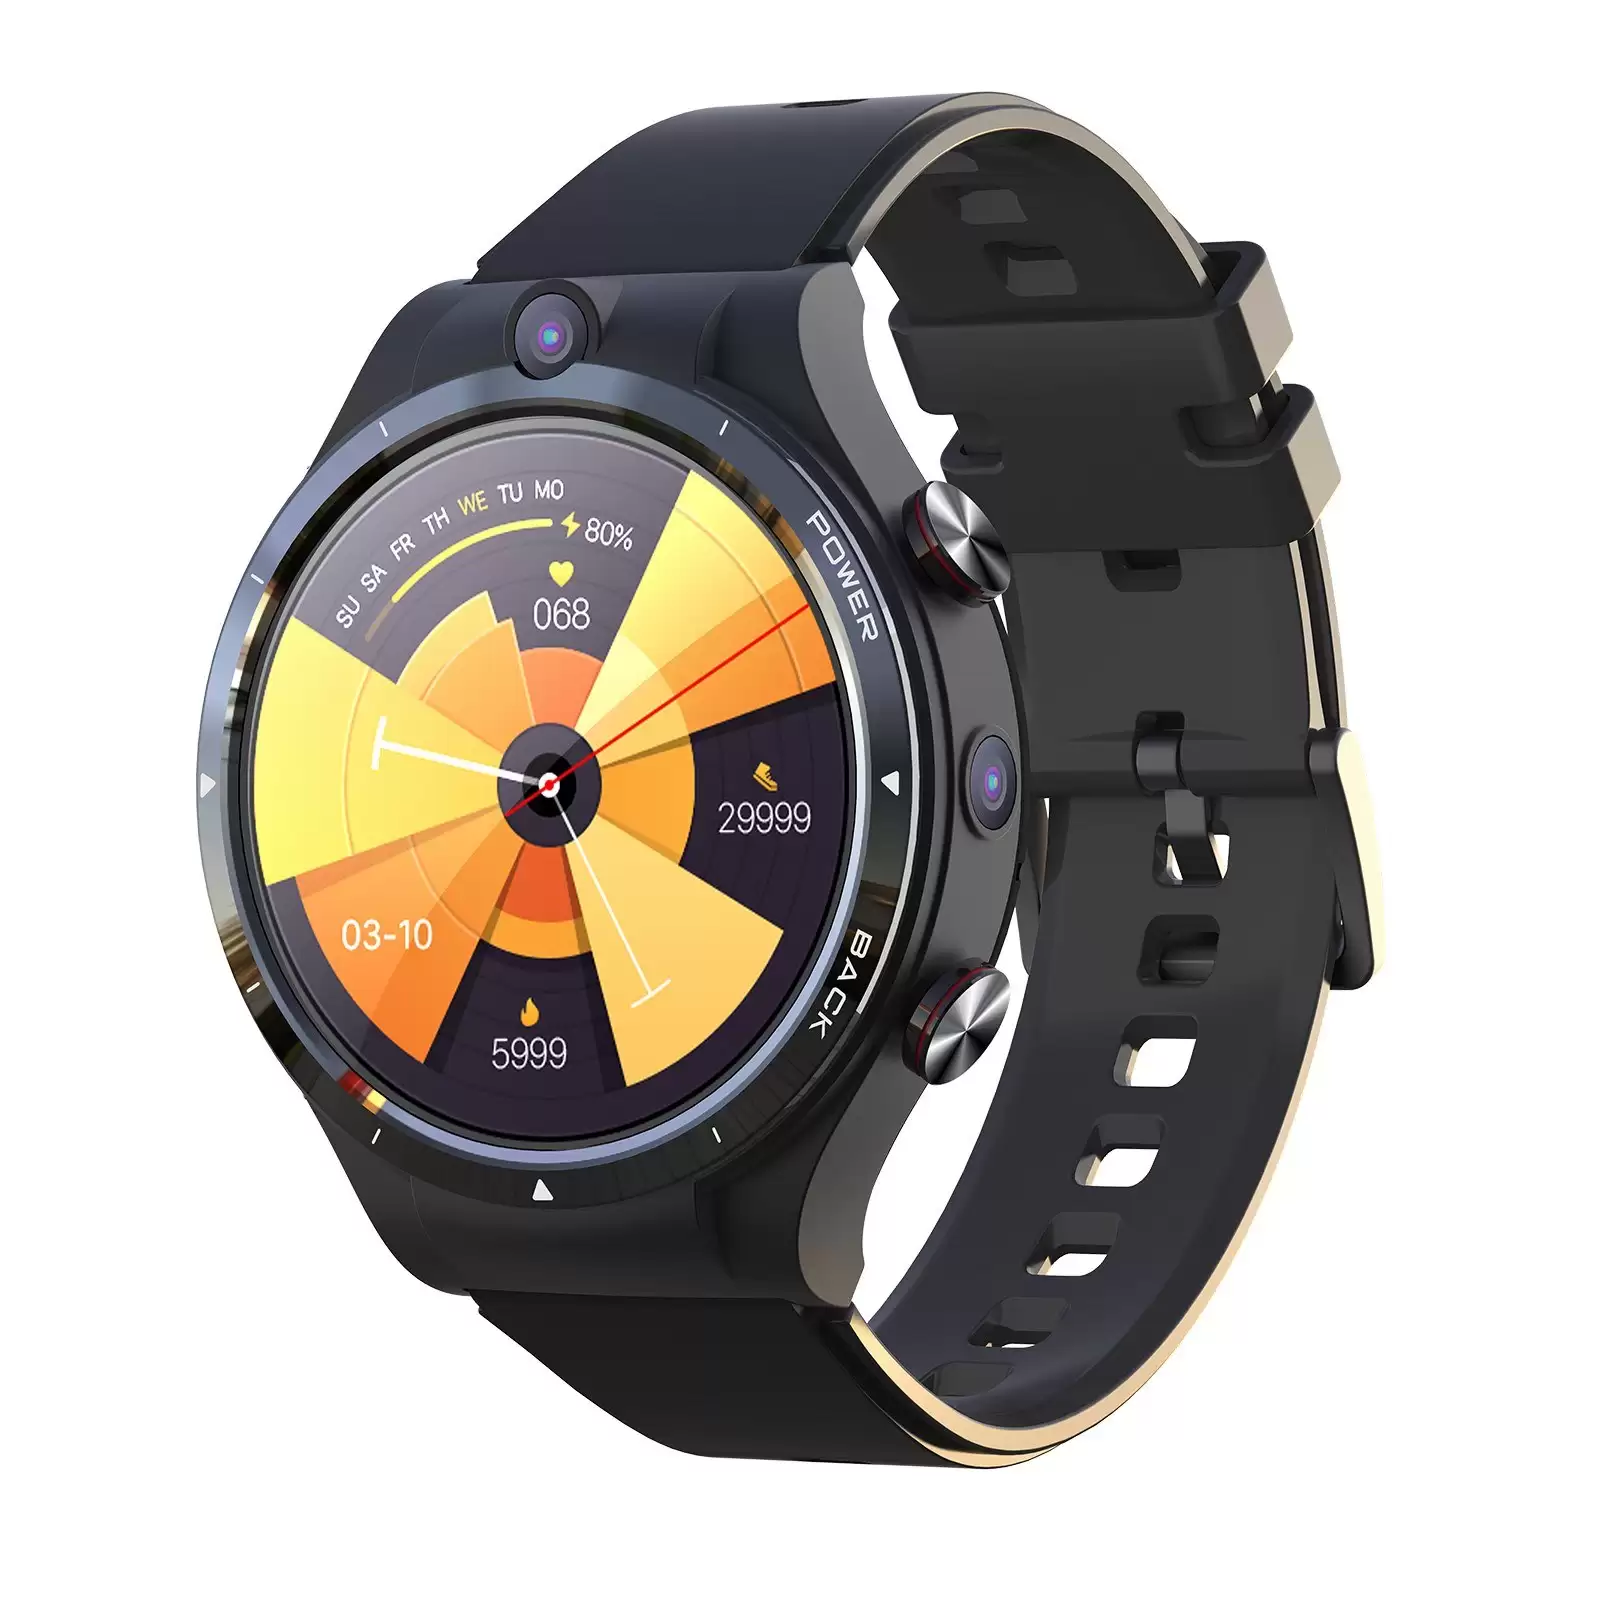 Order In Just $199.99 Lemfo Lem15 1.6-inch Ips Screen Smart Watch At Tomtop